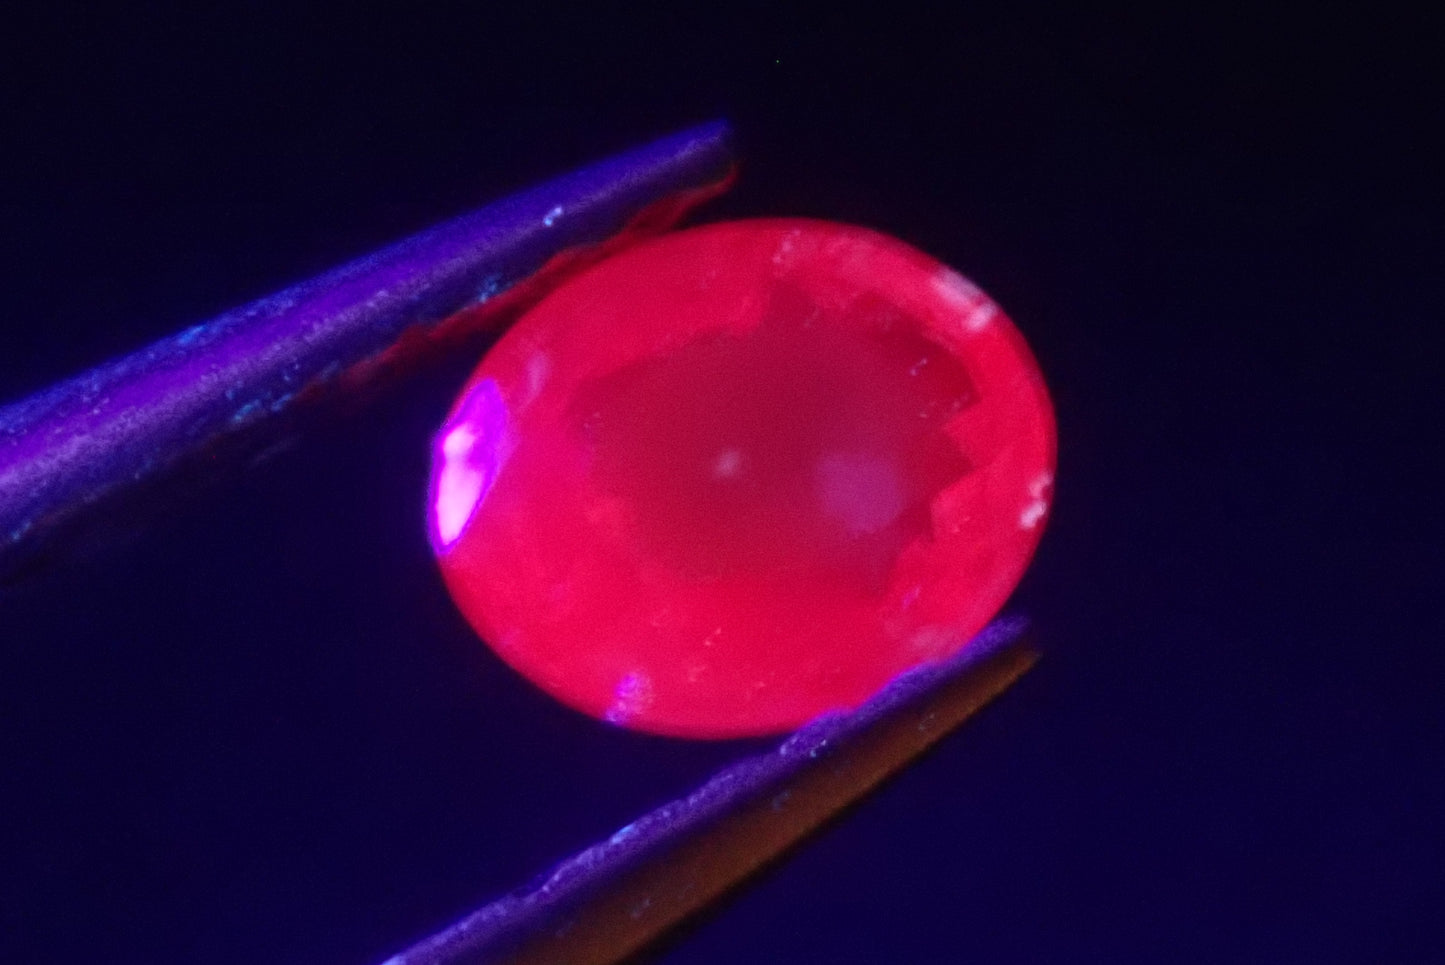 Ruby 0.396ct